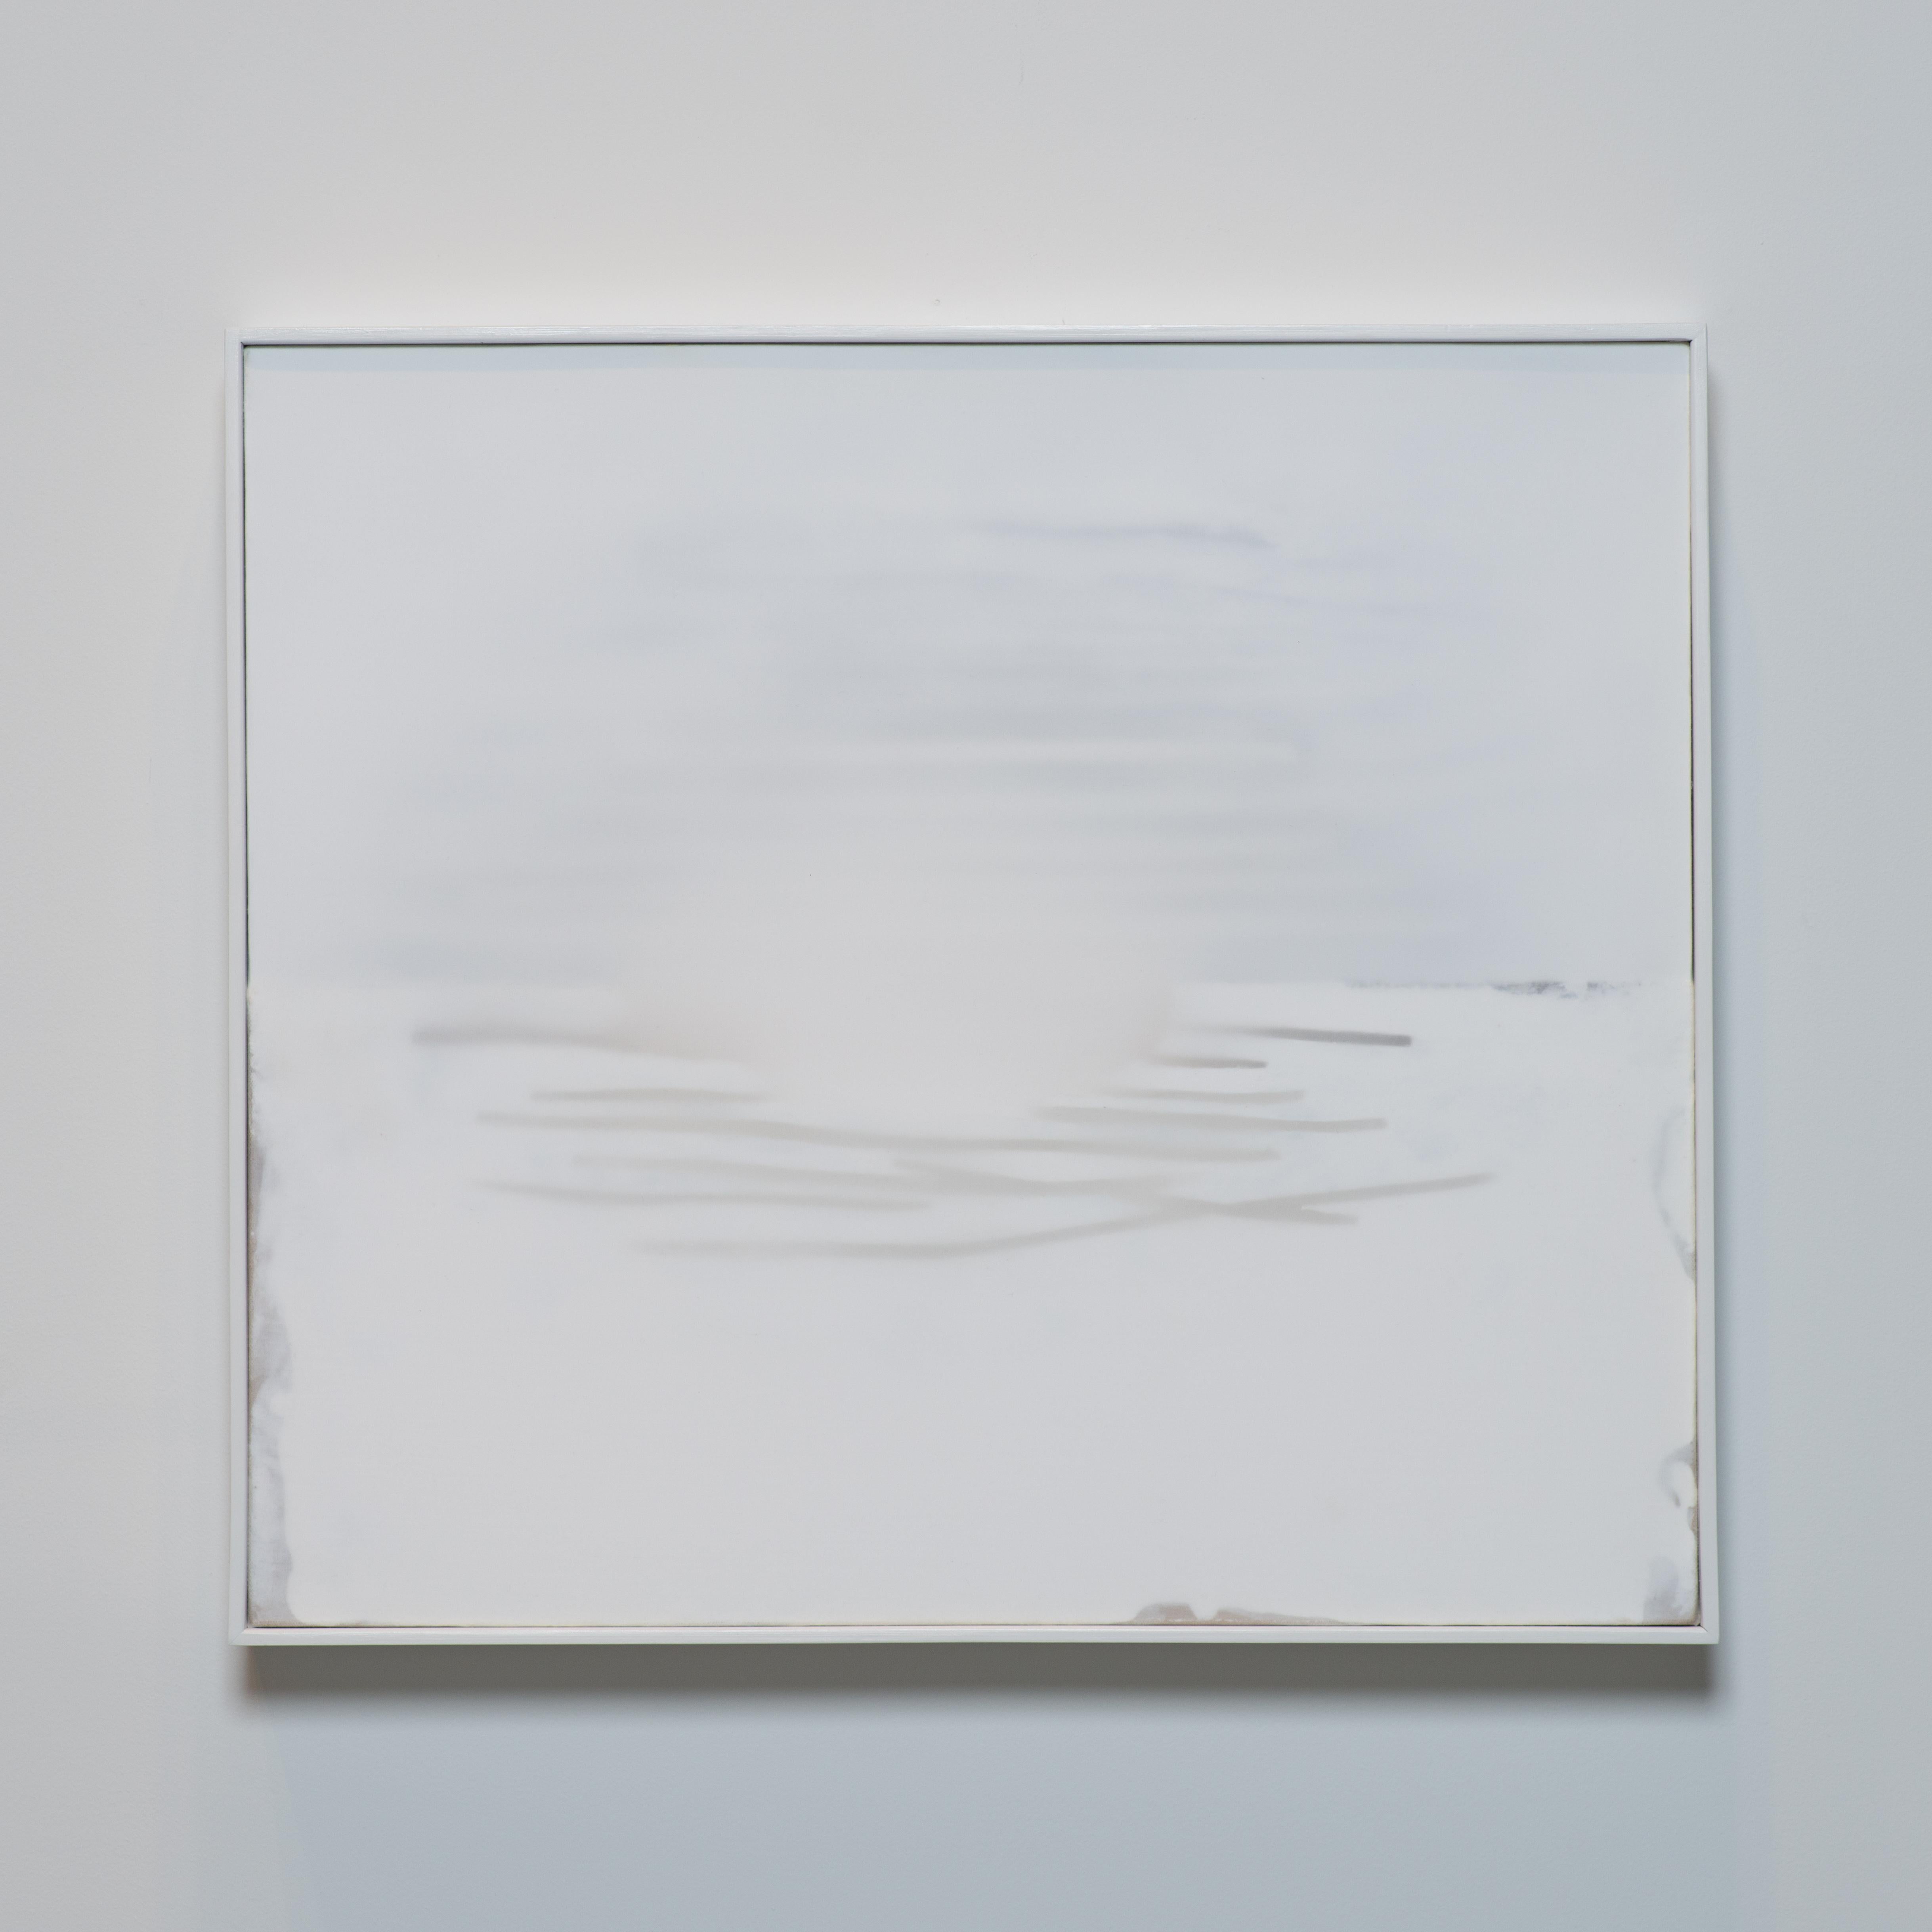 Innere Zeit 29, 2021
Mixed media on canvas
24 x 27 inches
60.96 x 68.58 cm

Udo Nöger creates luminous monochrome paintings that capture light, movement and energy expressed in highly minimalistic compositions. Nöger, who grew up in Enger, a town in